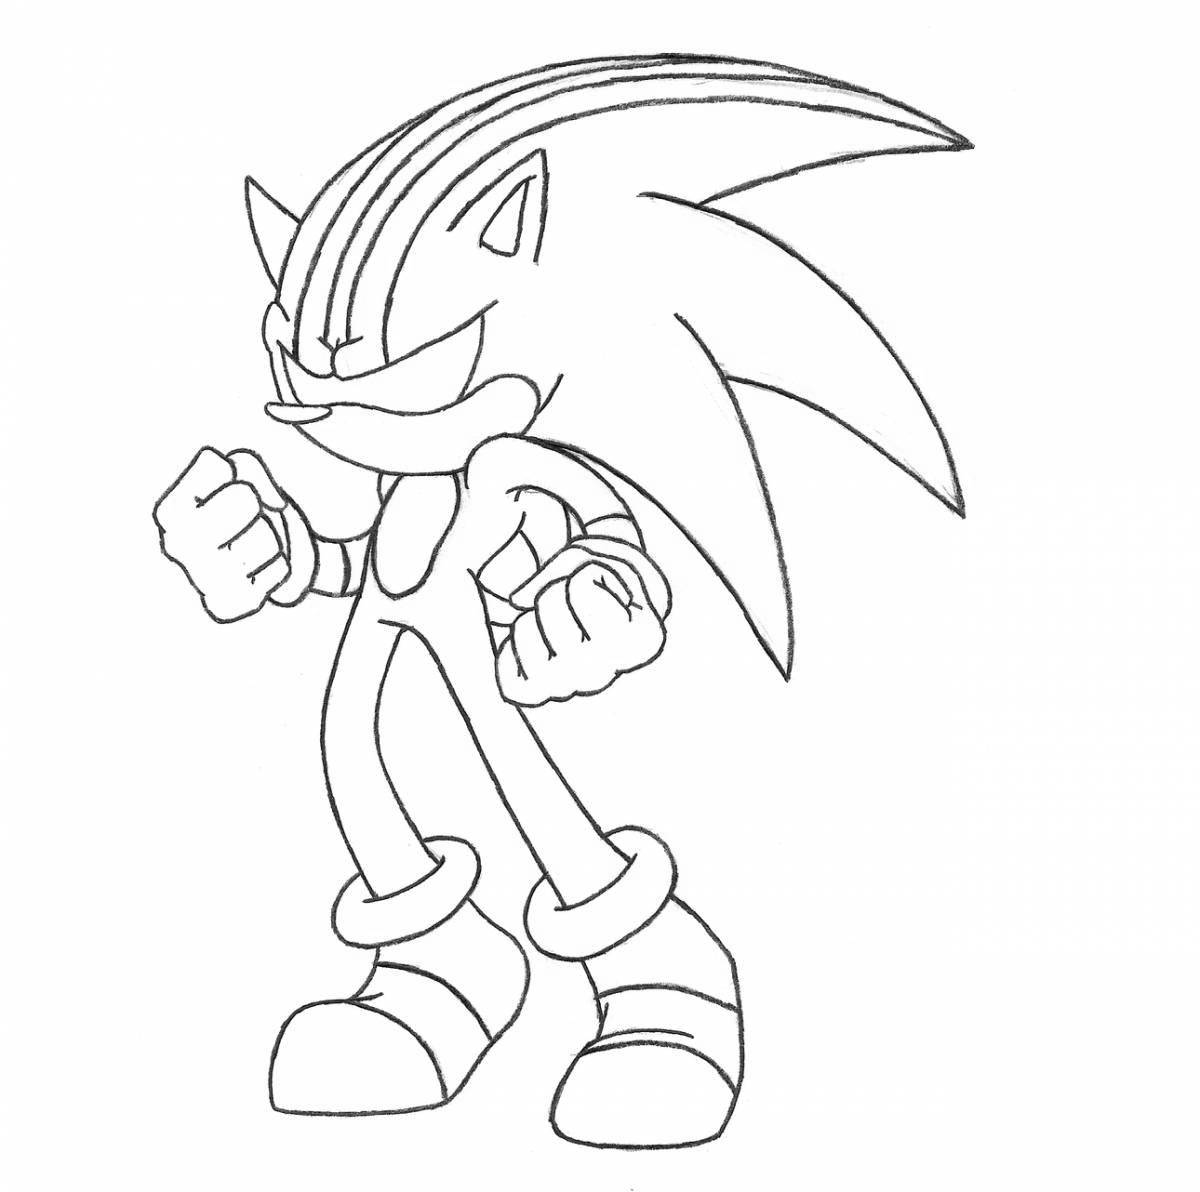 Dynamic dark sonic coloring page